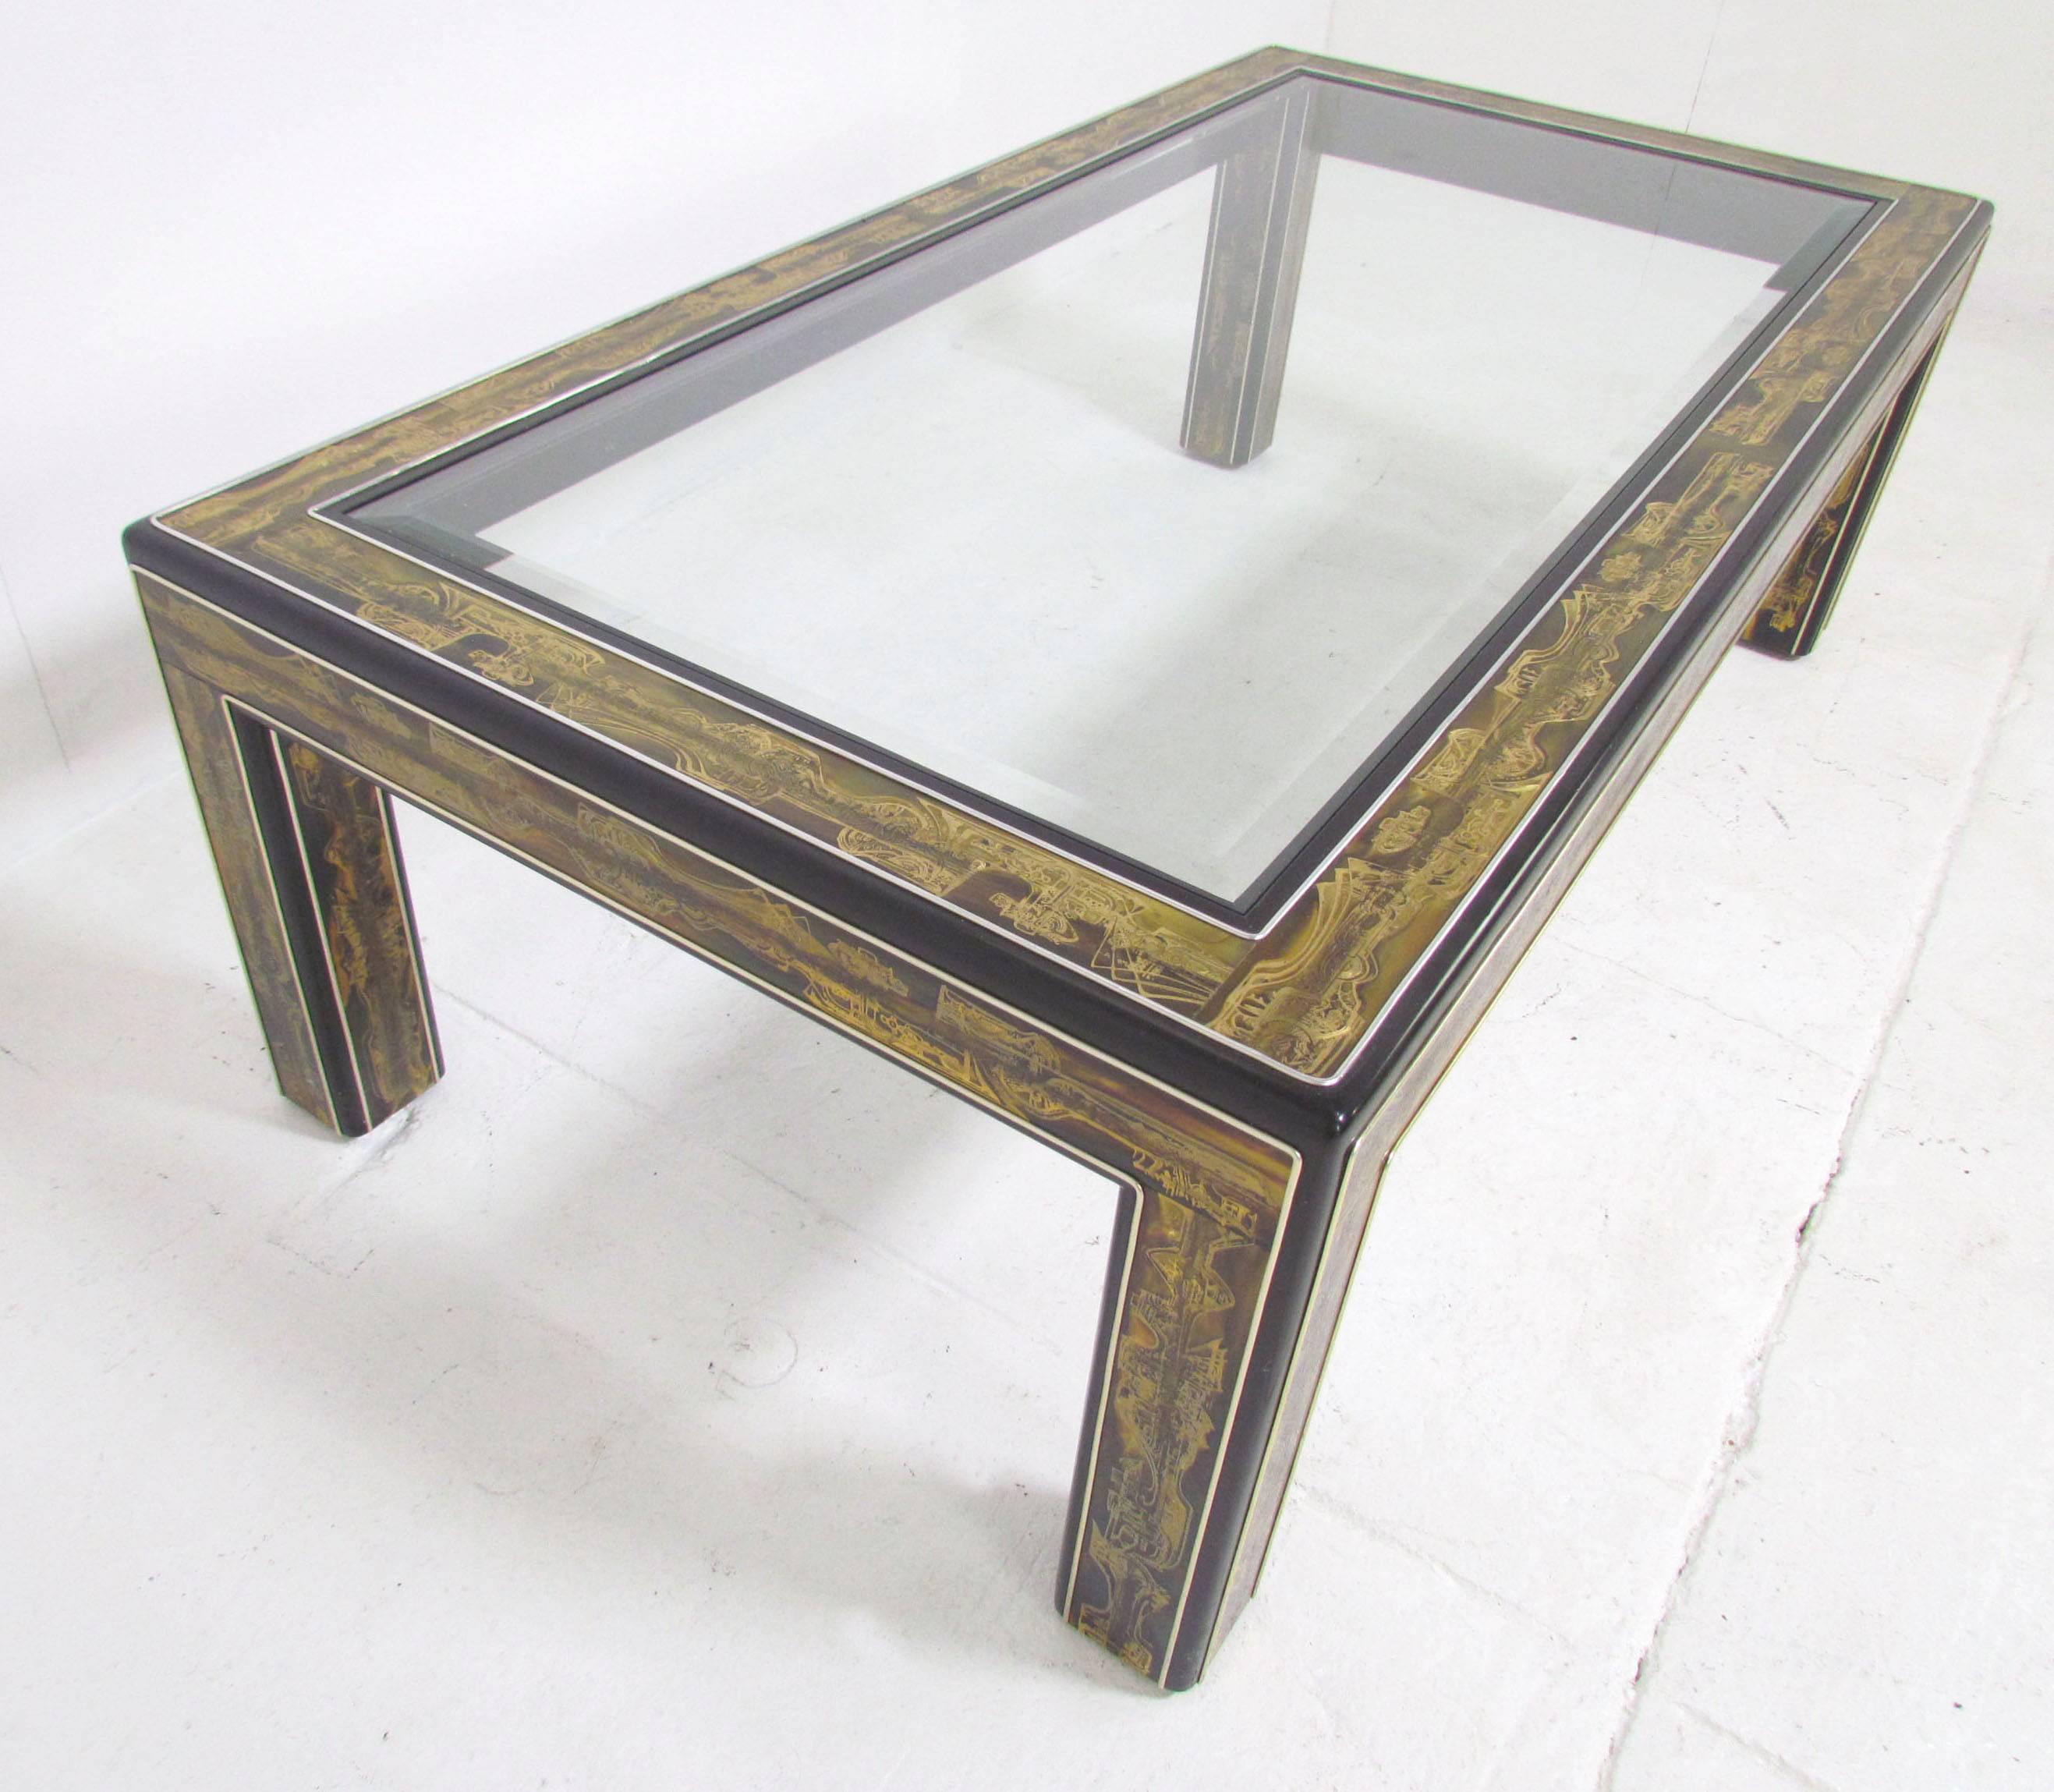 Parsons style coffee table by Bernhard Rohne for Mastercraft with abstract acid etched decoration on brass panels, affixed to a lacquered wood frame. The glass is lightly smoked.